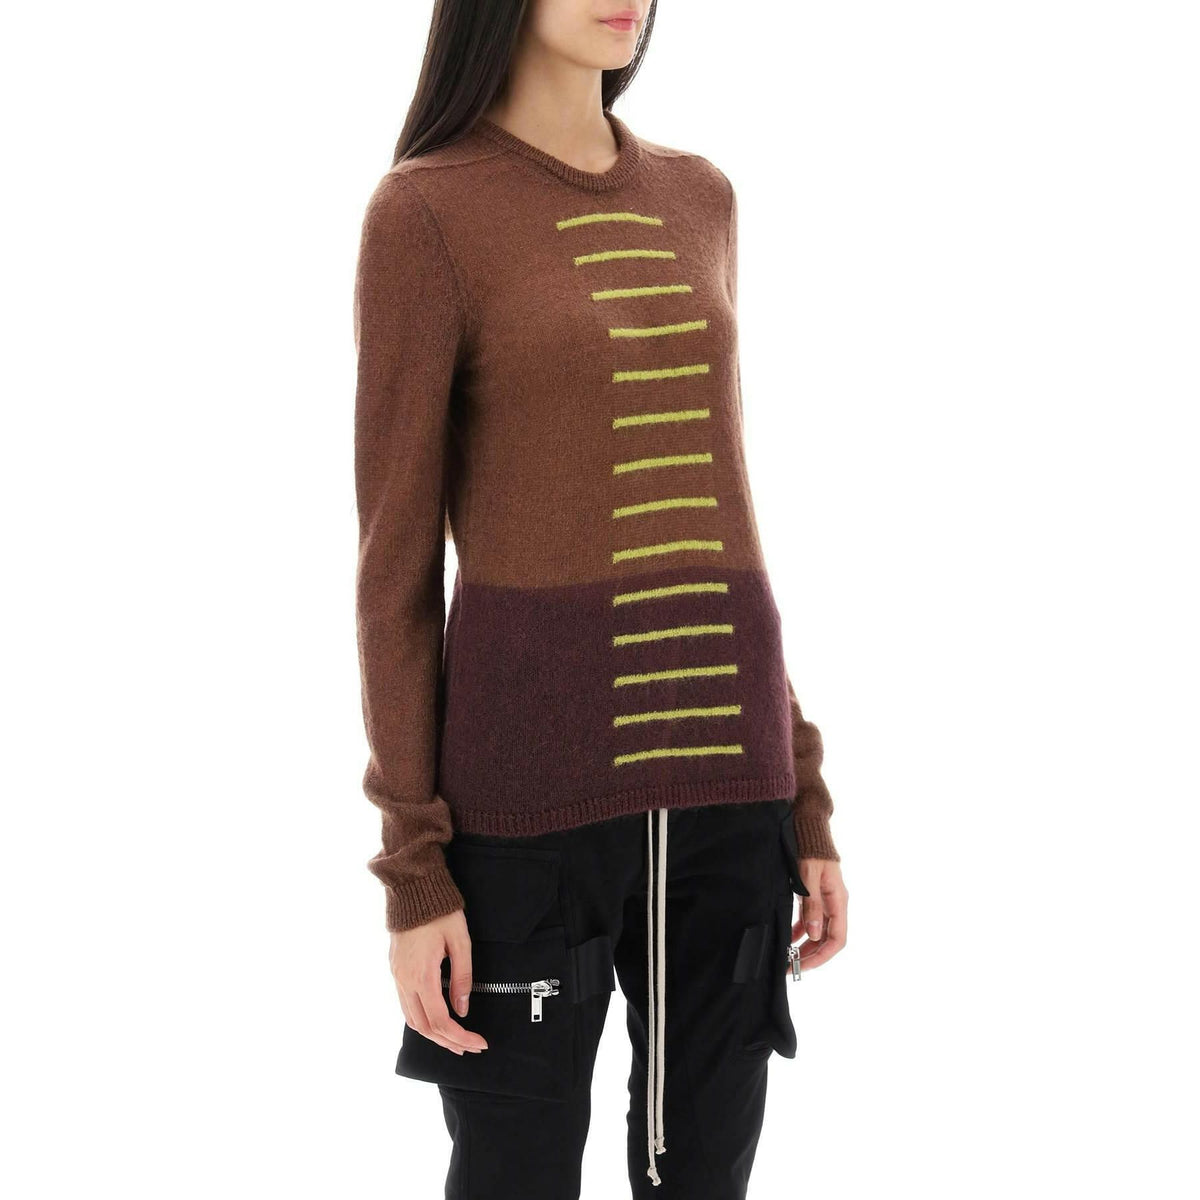 Rick Owens 'Judd' Sweater With Contrasting Lines - JOHN JULIA